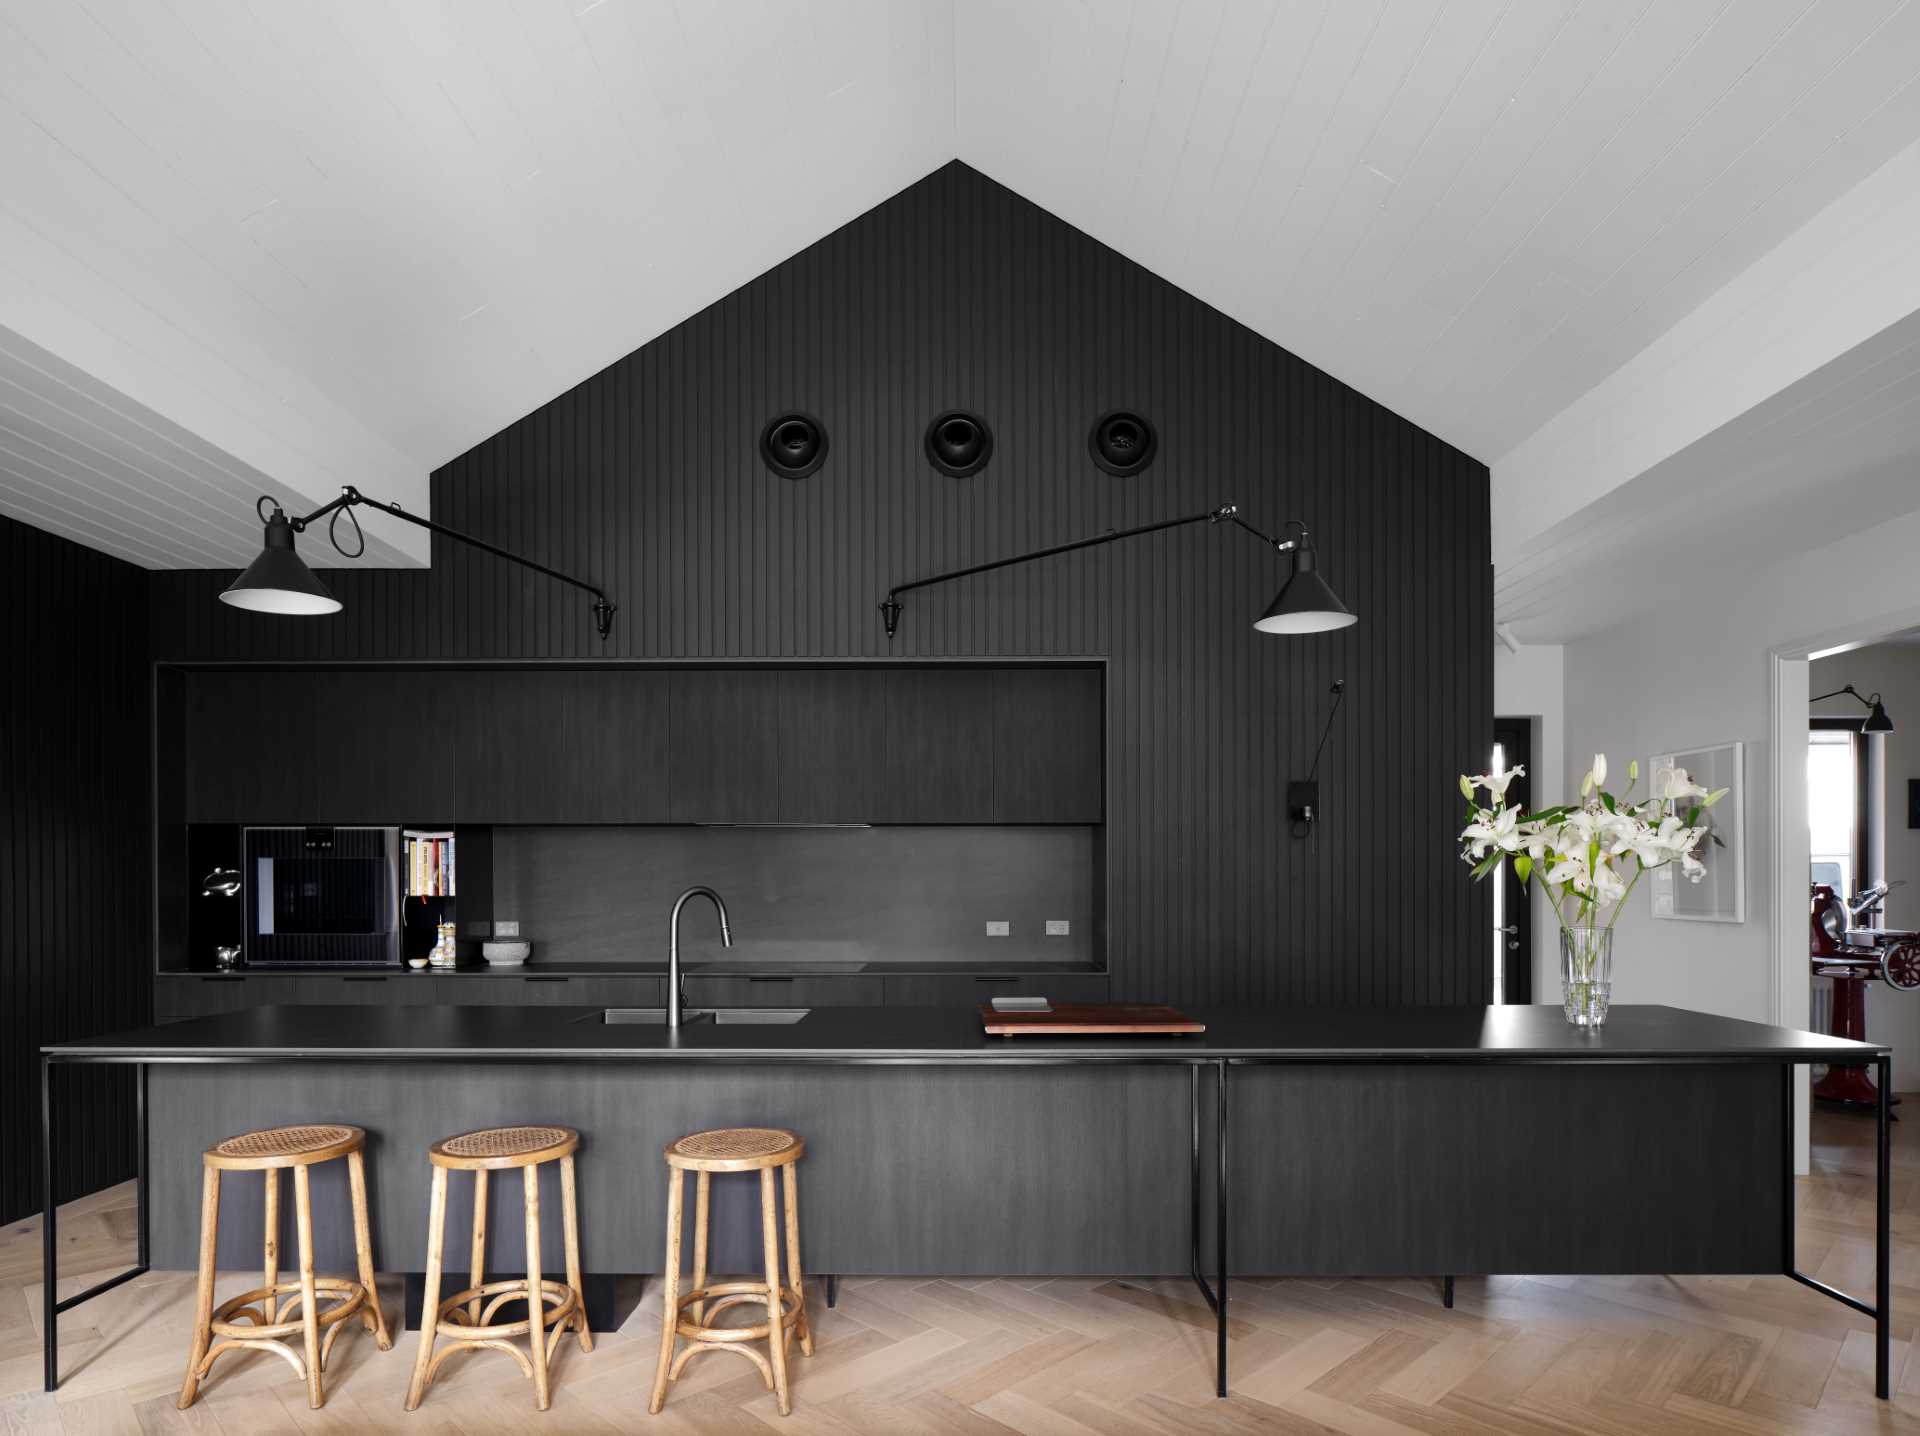 A Black Kitchen Is A Bold Design Choice For This Home